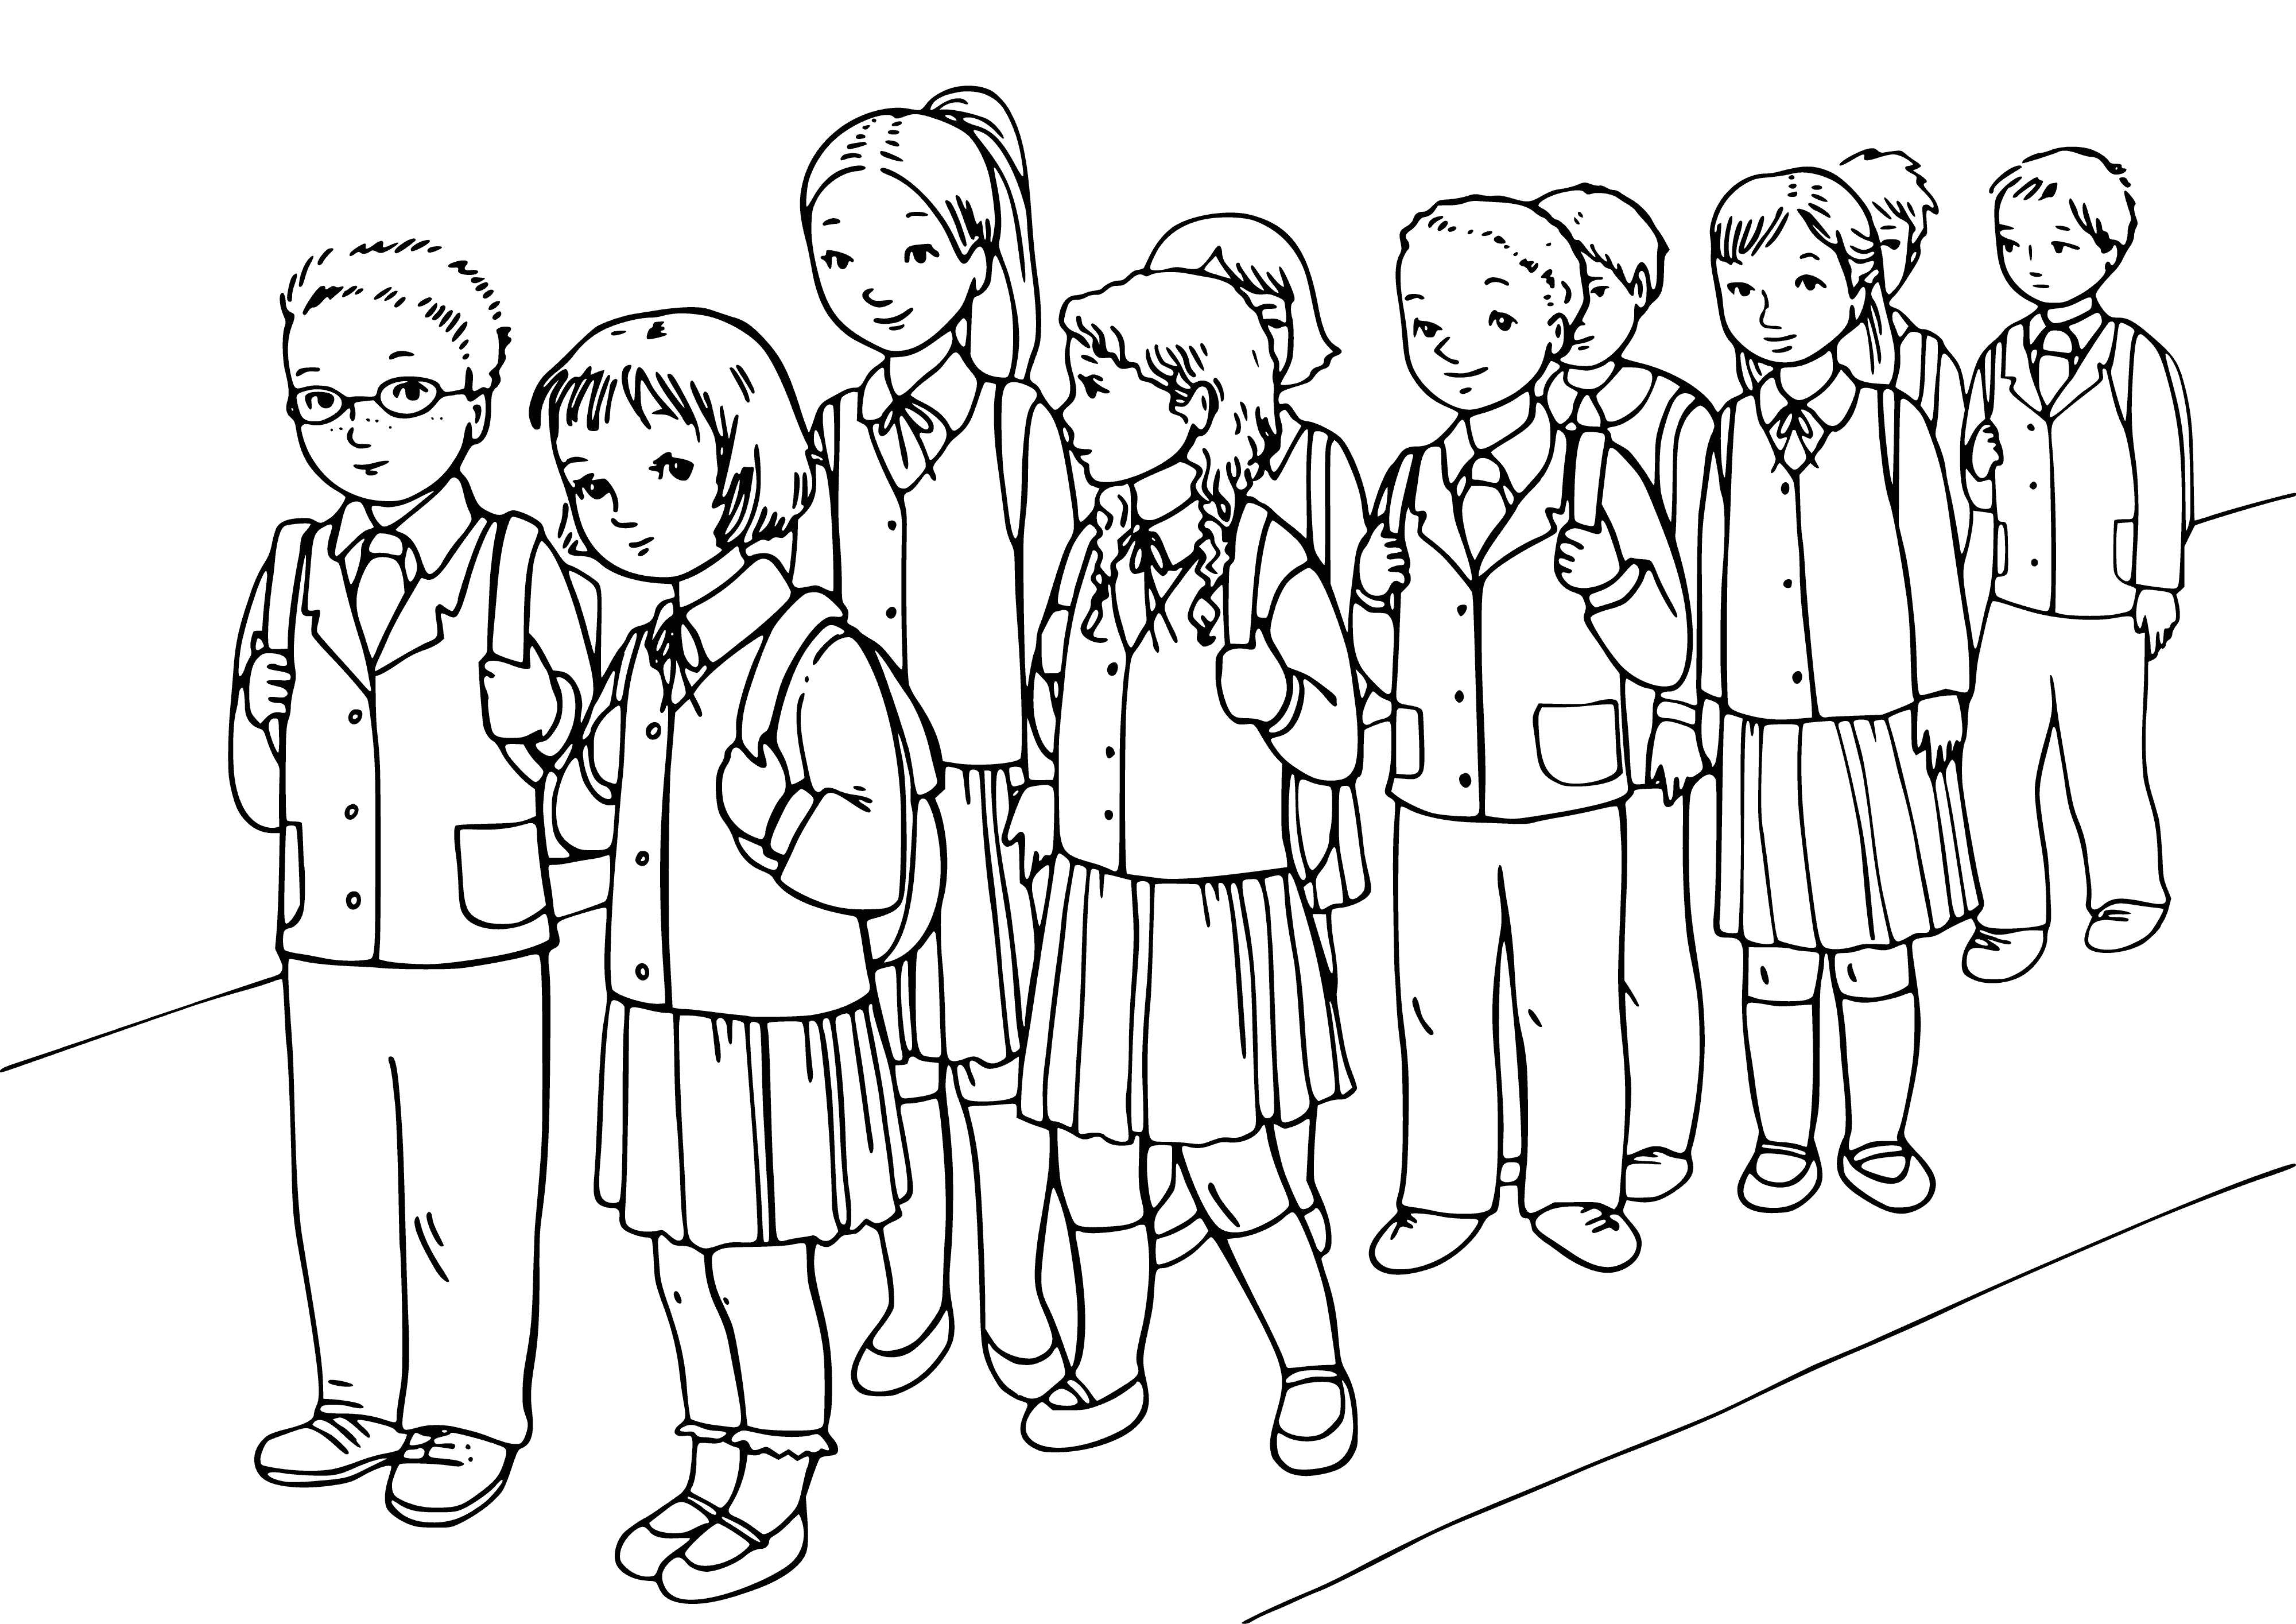 coloring page: Two kids, holding books, surrounded by classmates in uniforms, look up in awe. #coloringpage